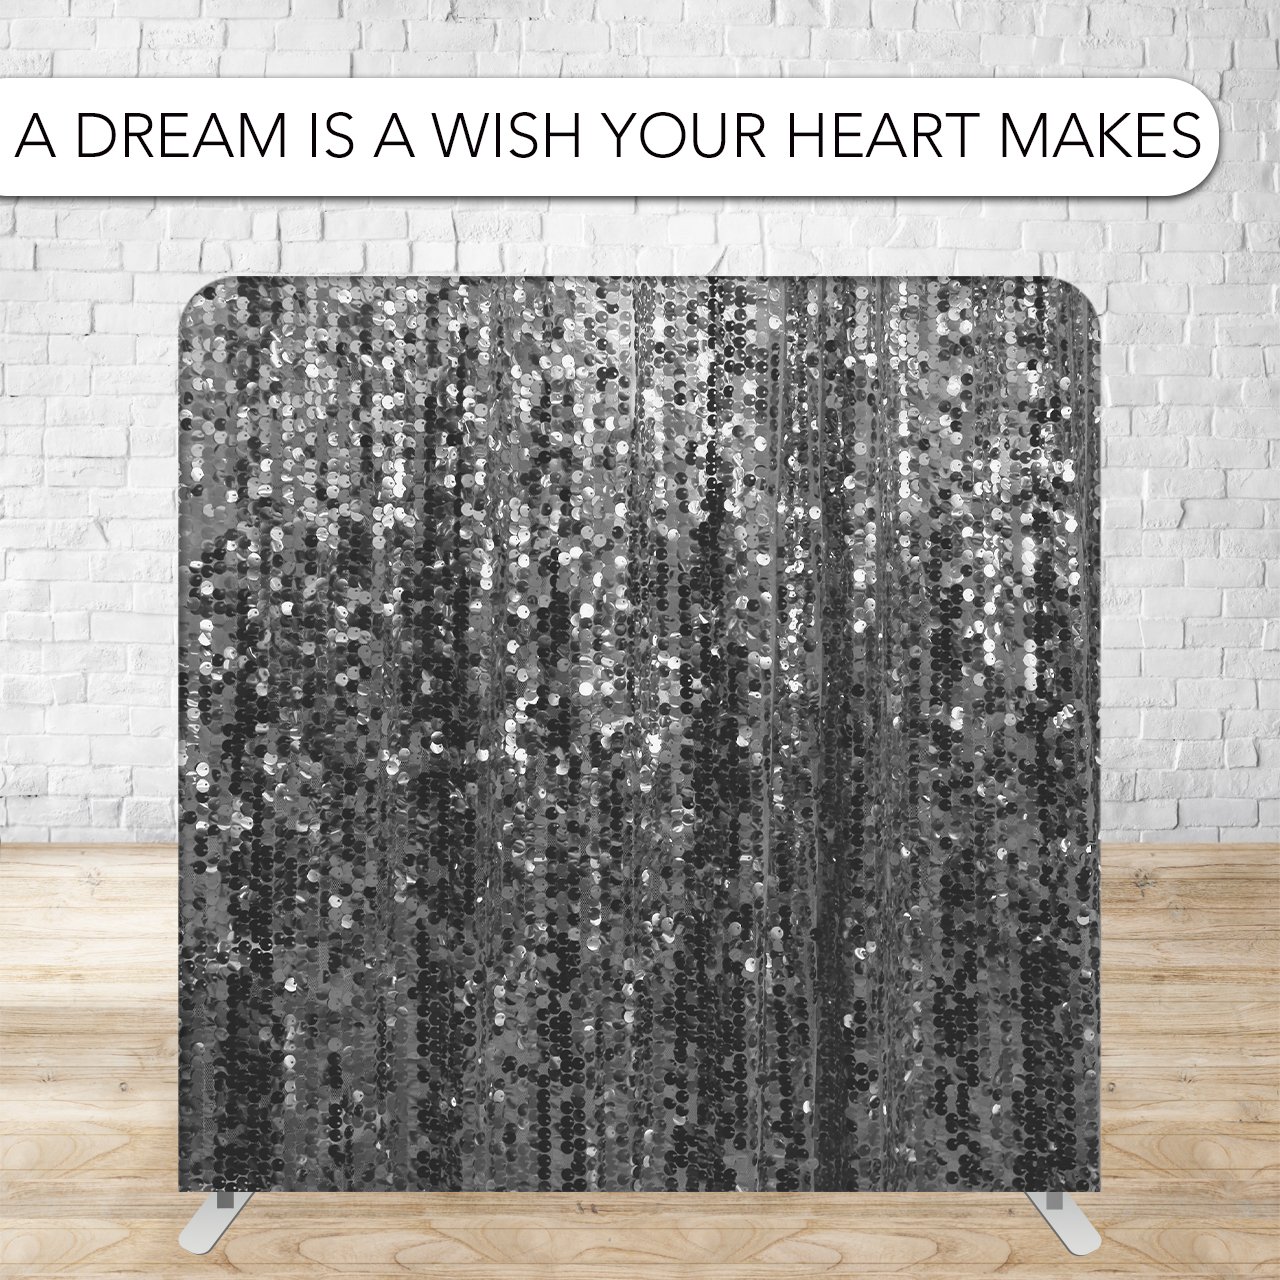 a dream is a wish your heart makes uw.jpg